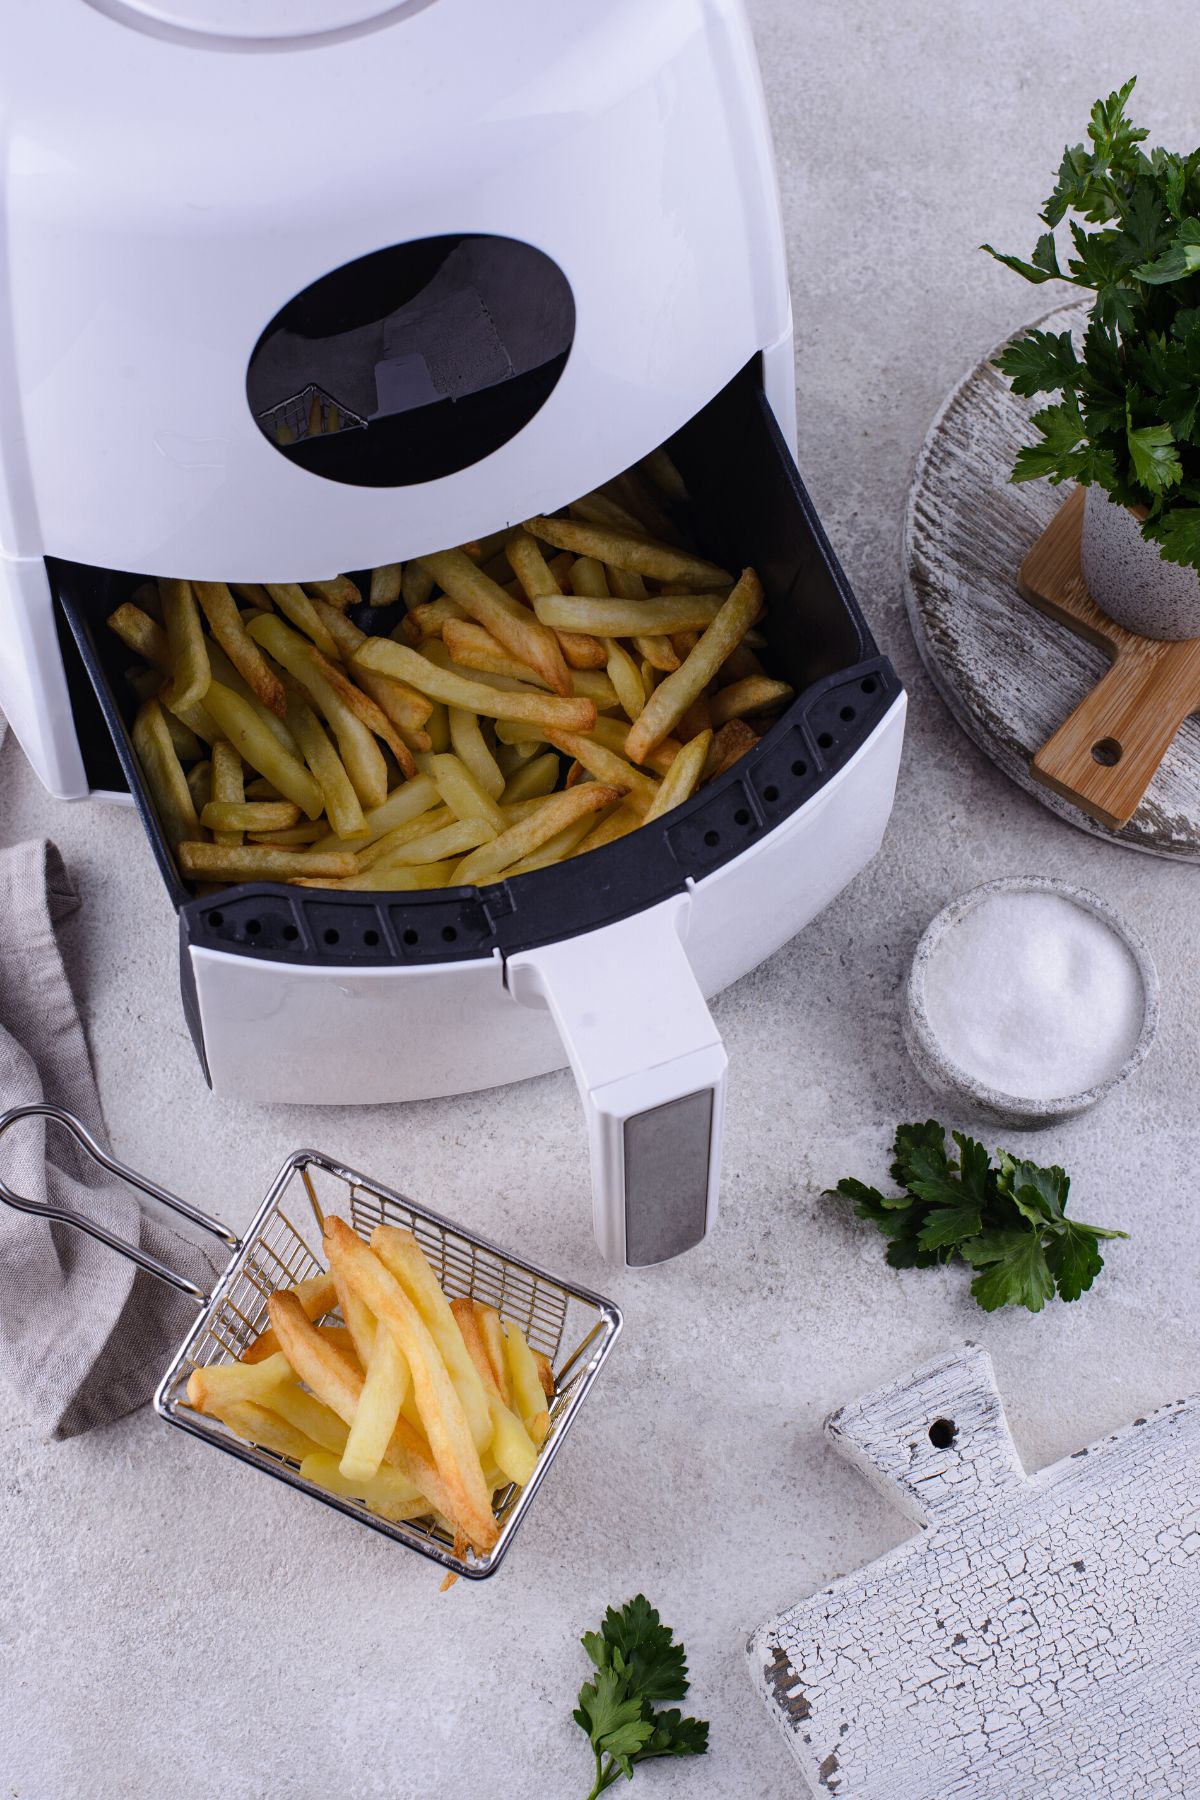 White air fryer open and the basket is filled with fries.